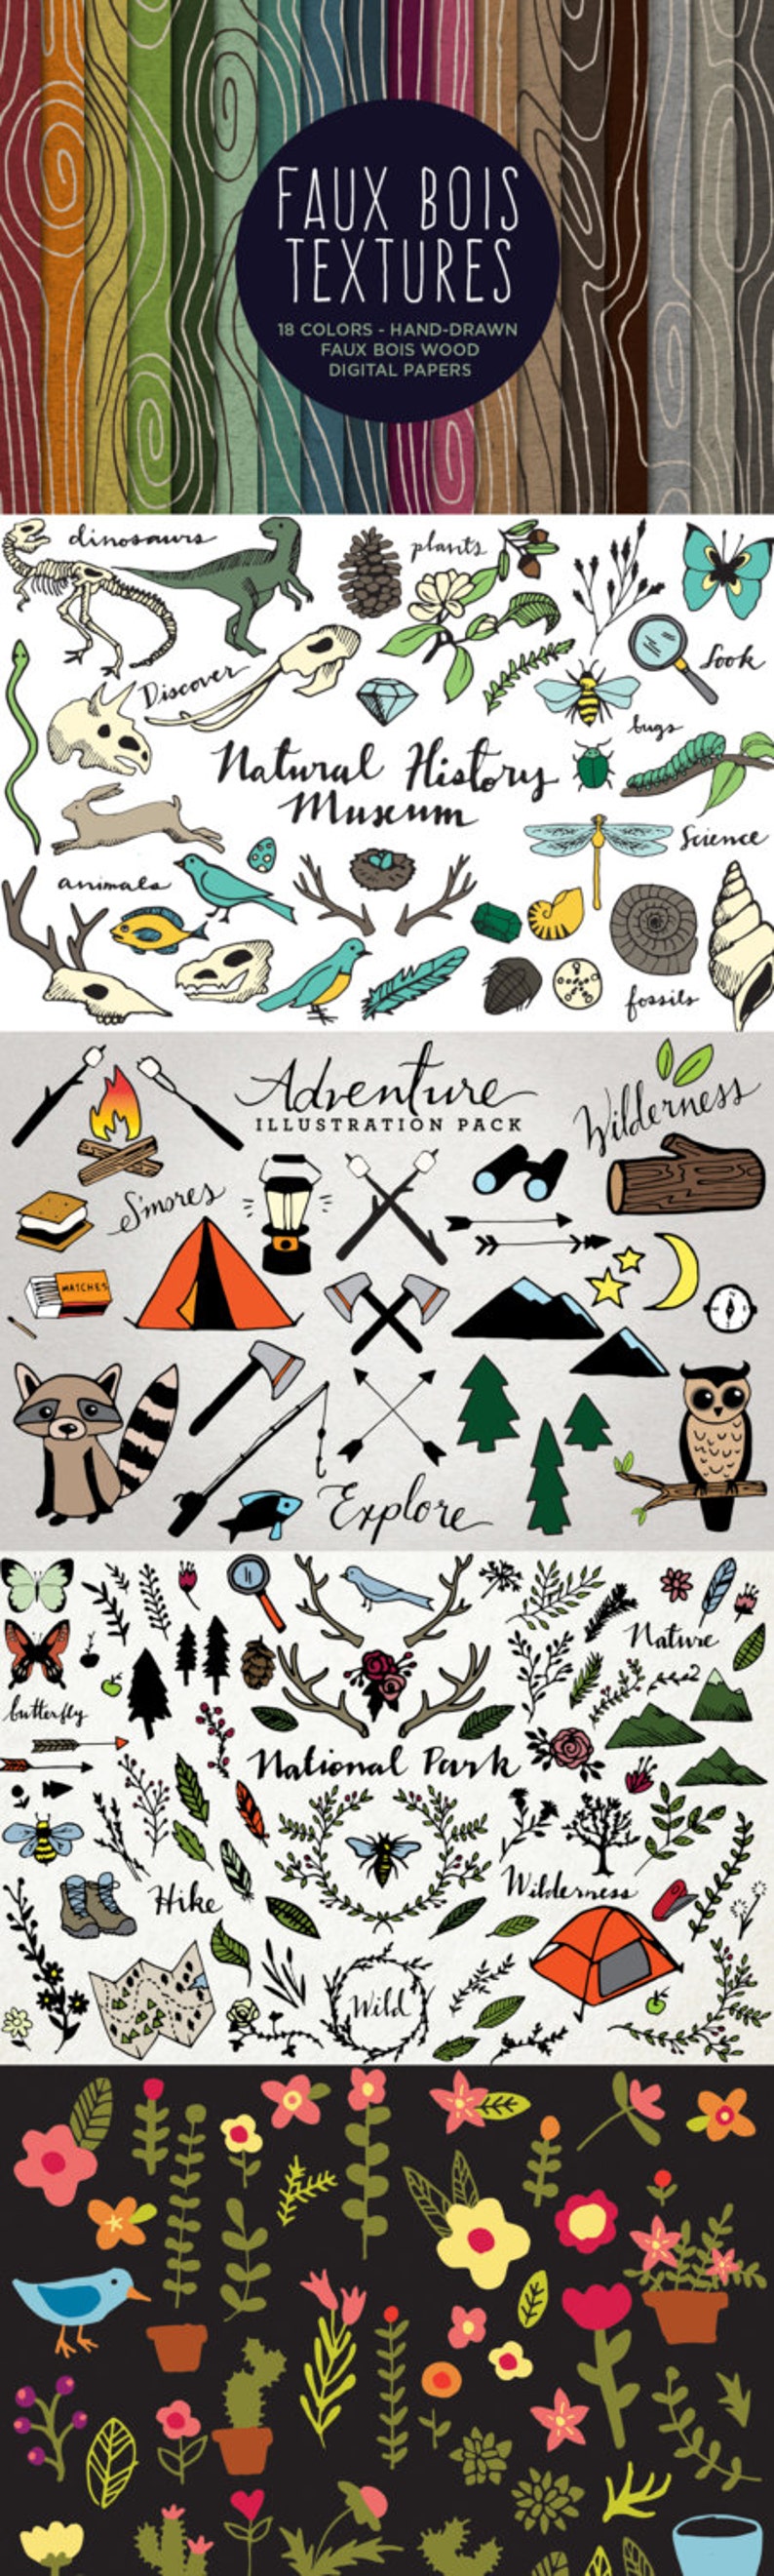 Nature Clipart MEGAPACK Camping clipart, wilderness clipart, hand drawn illustrations, bear fox animals tent mountains s'more backpacking image 5